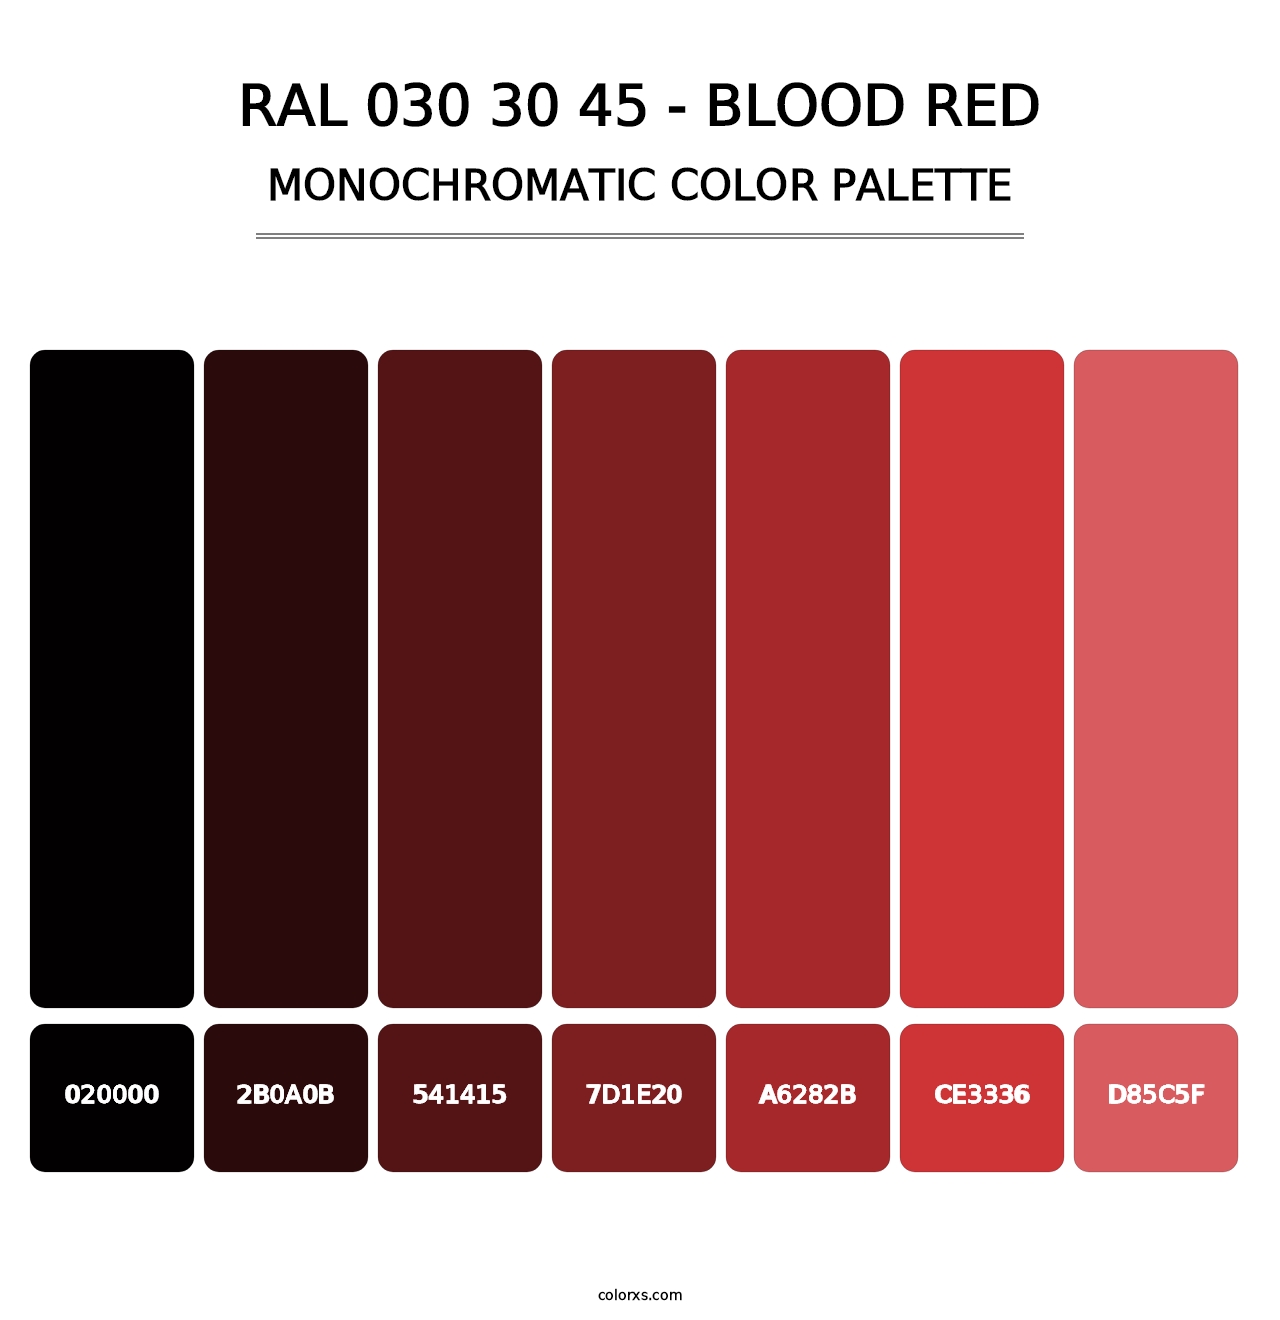 RAL 030 30 45 - Blood Red - Monochromatic Color Palette